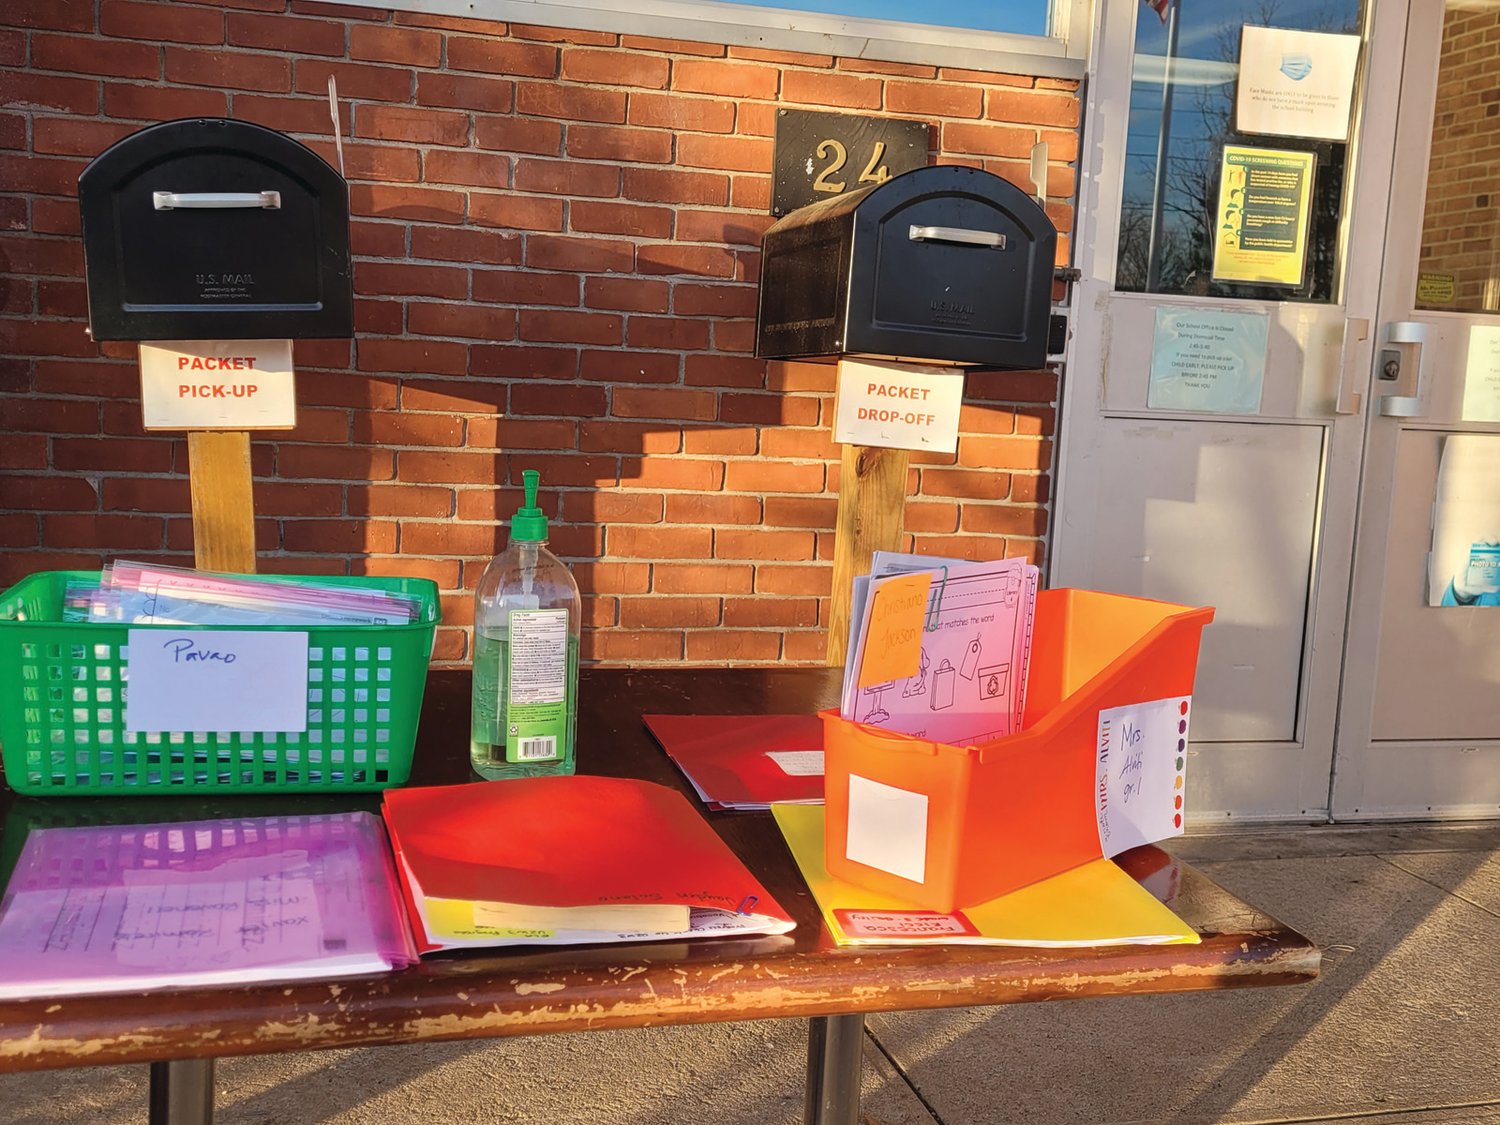 HOME WORK AWAITS: Packets of school work await students outside the main entrance to : Sarah Dyer Barnes Elementary School in Johnston, which has been closed for the week after a significant COVID-19 outbreak.